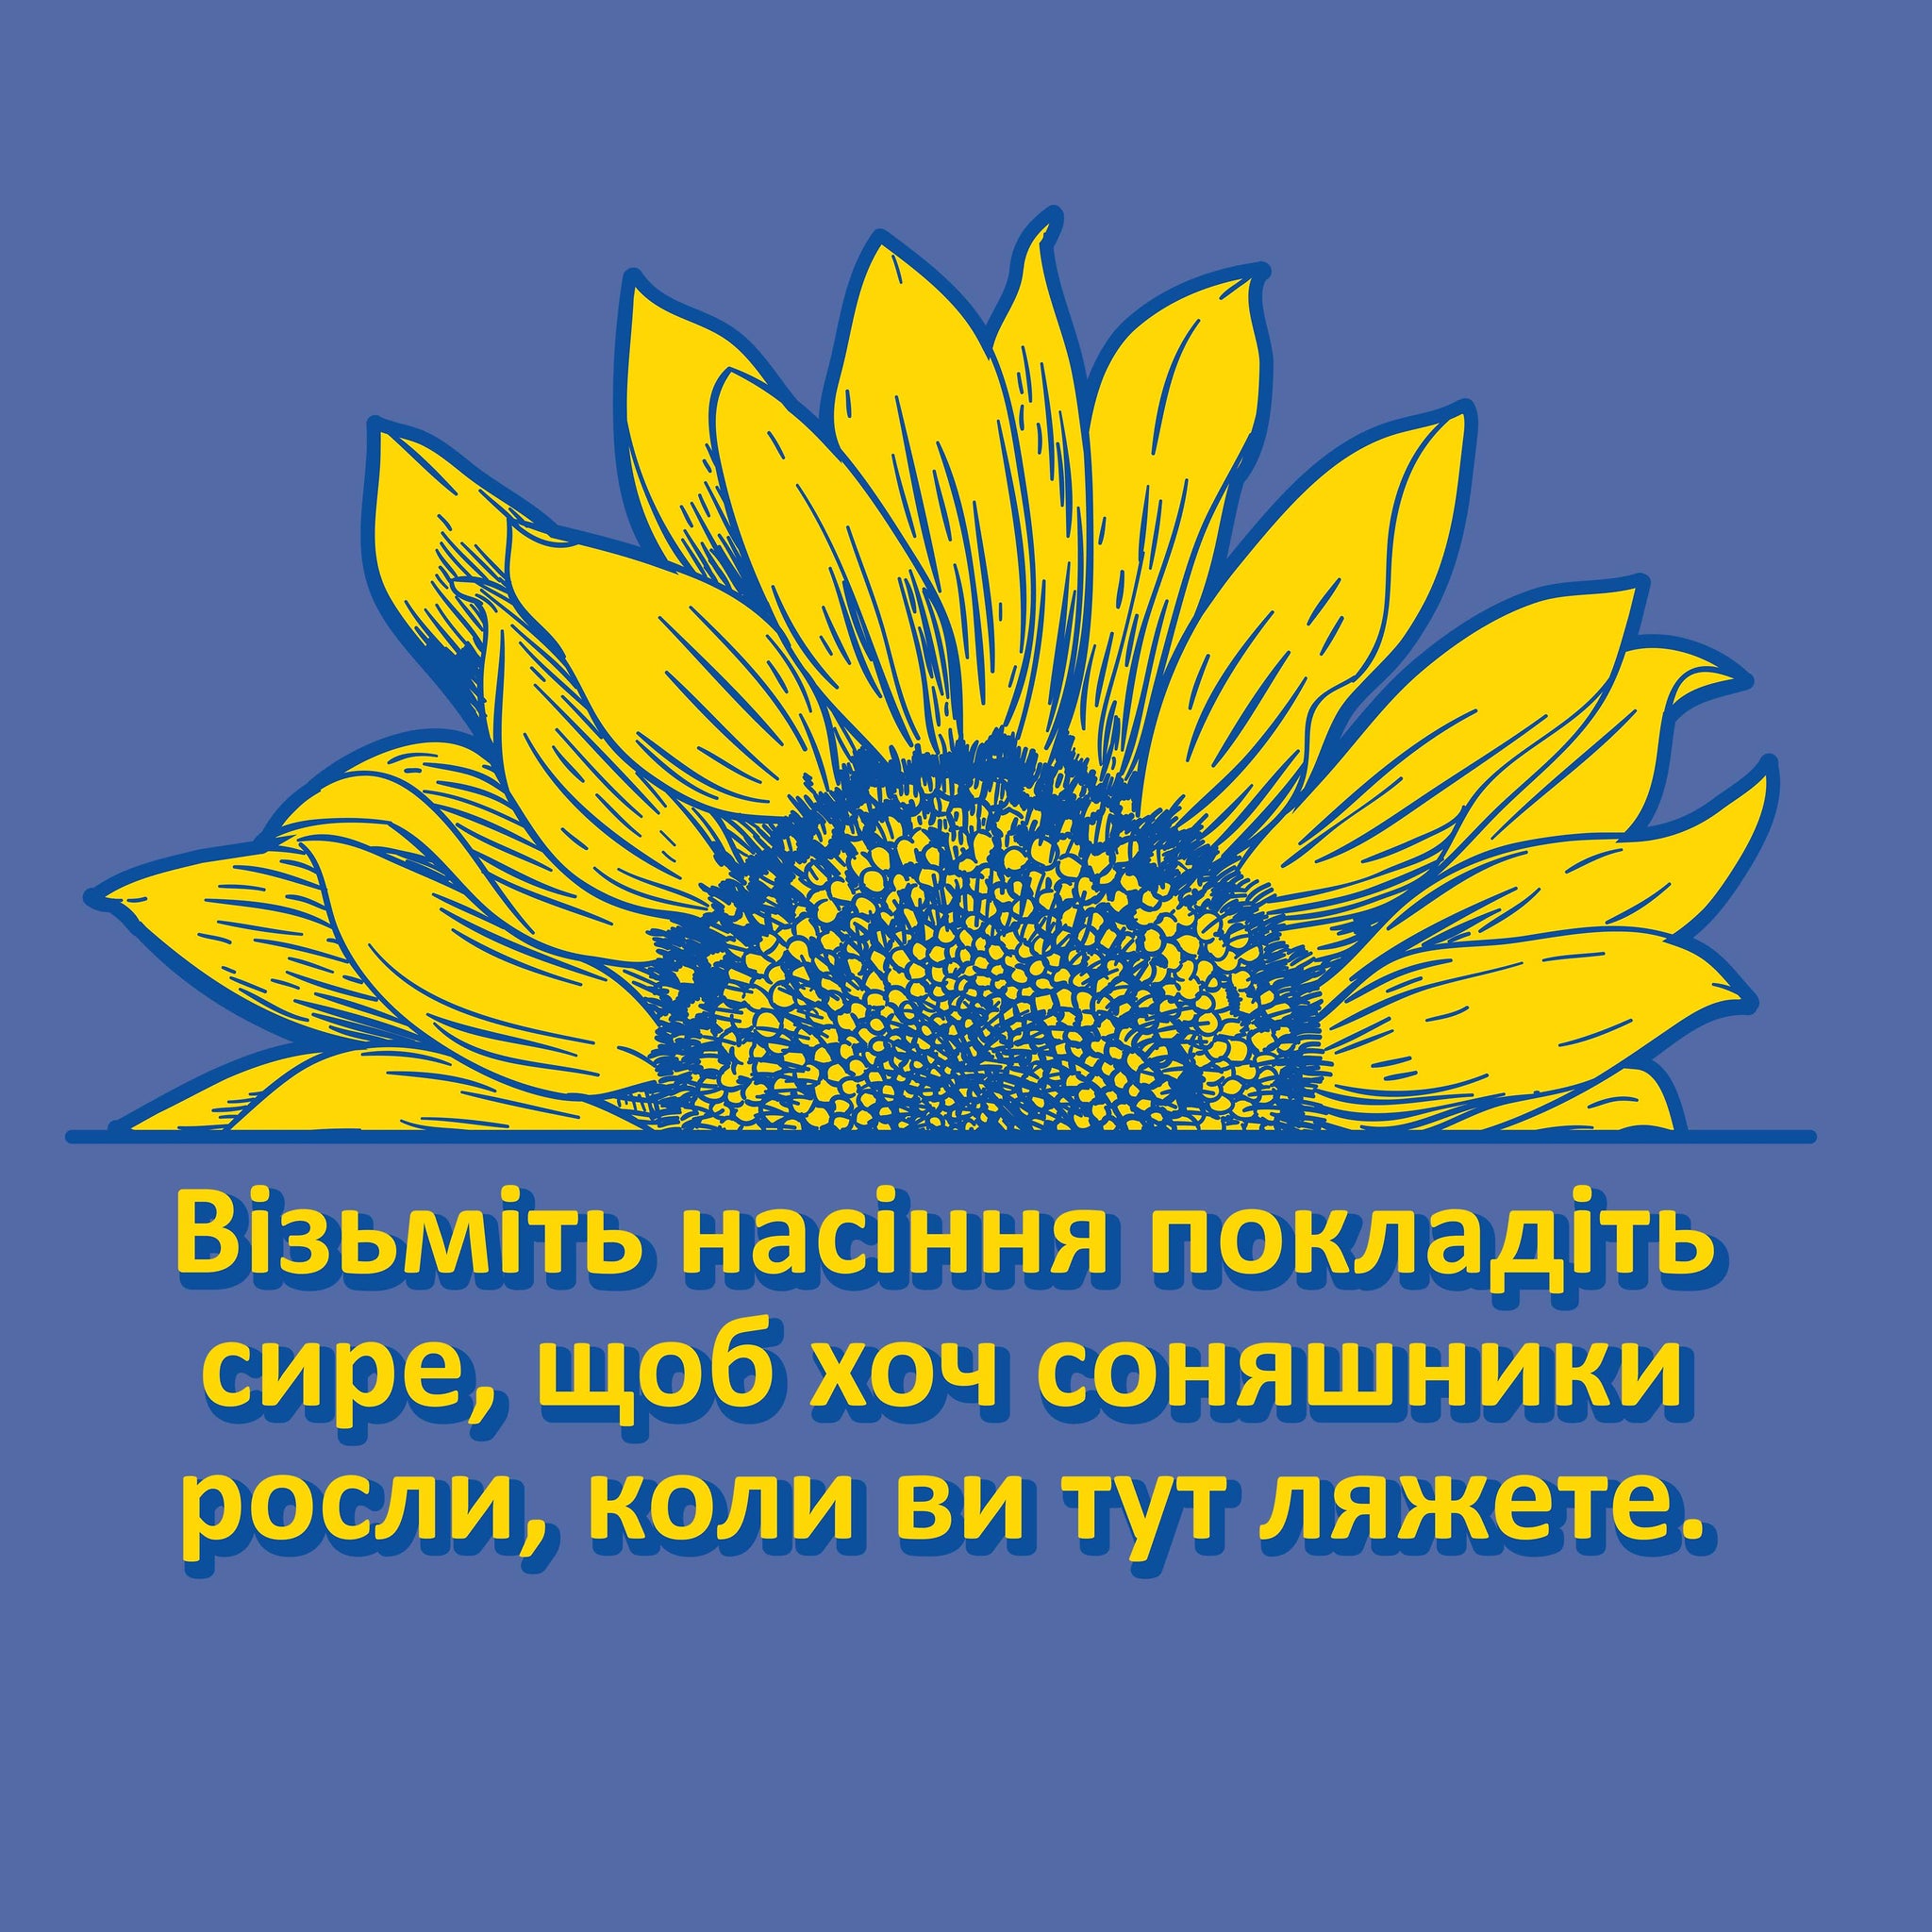 chesterfield suite design of a sunflower with the phrase Take these seeds and put them in your pocket so sunflowers will grow when you die in ukrainian.